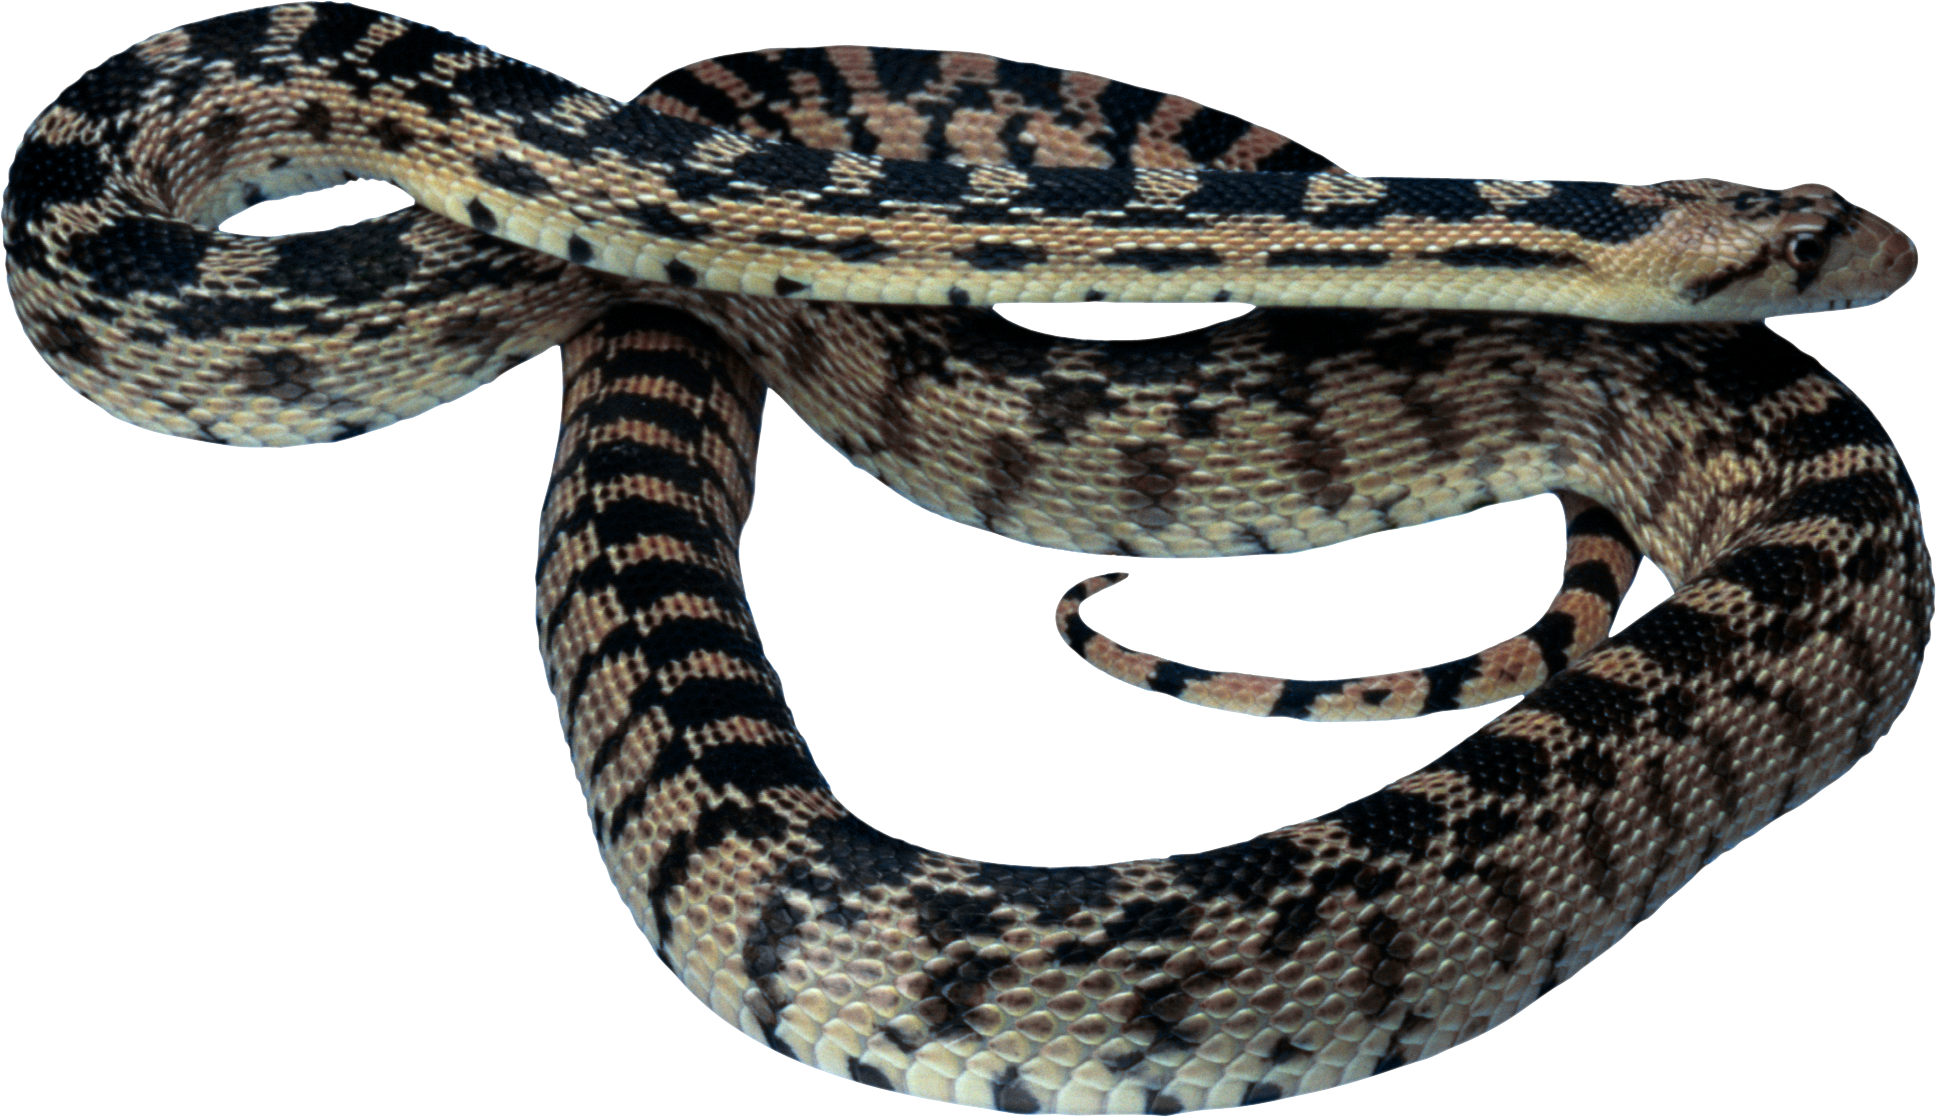 Coiled Snake PNG HD - 129052